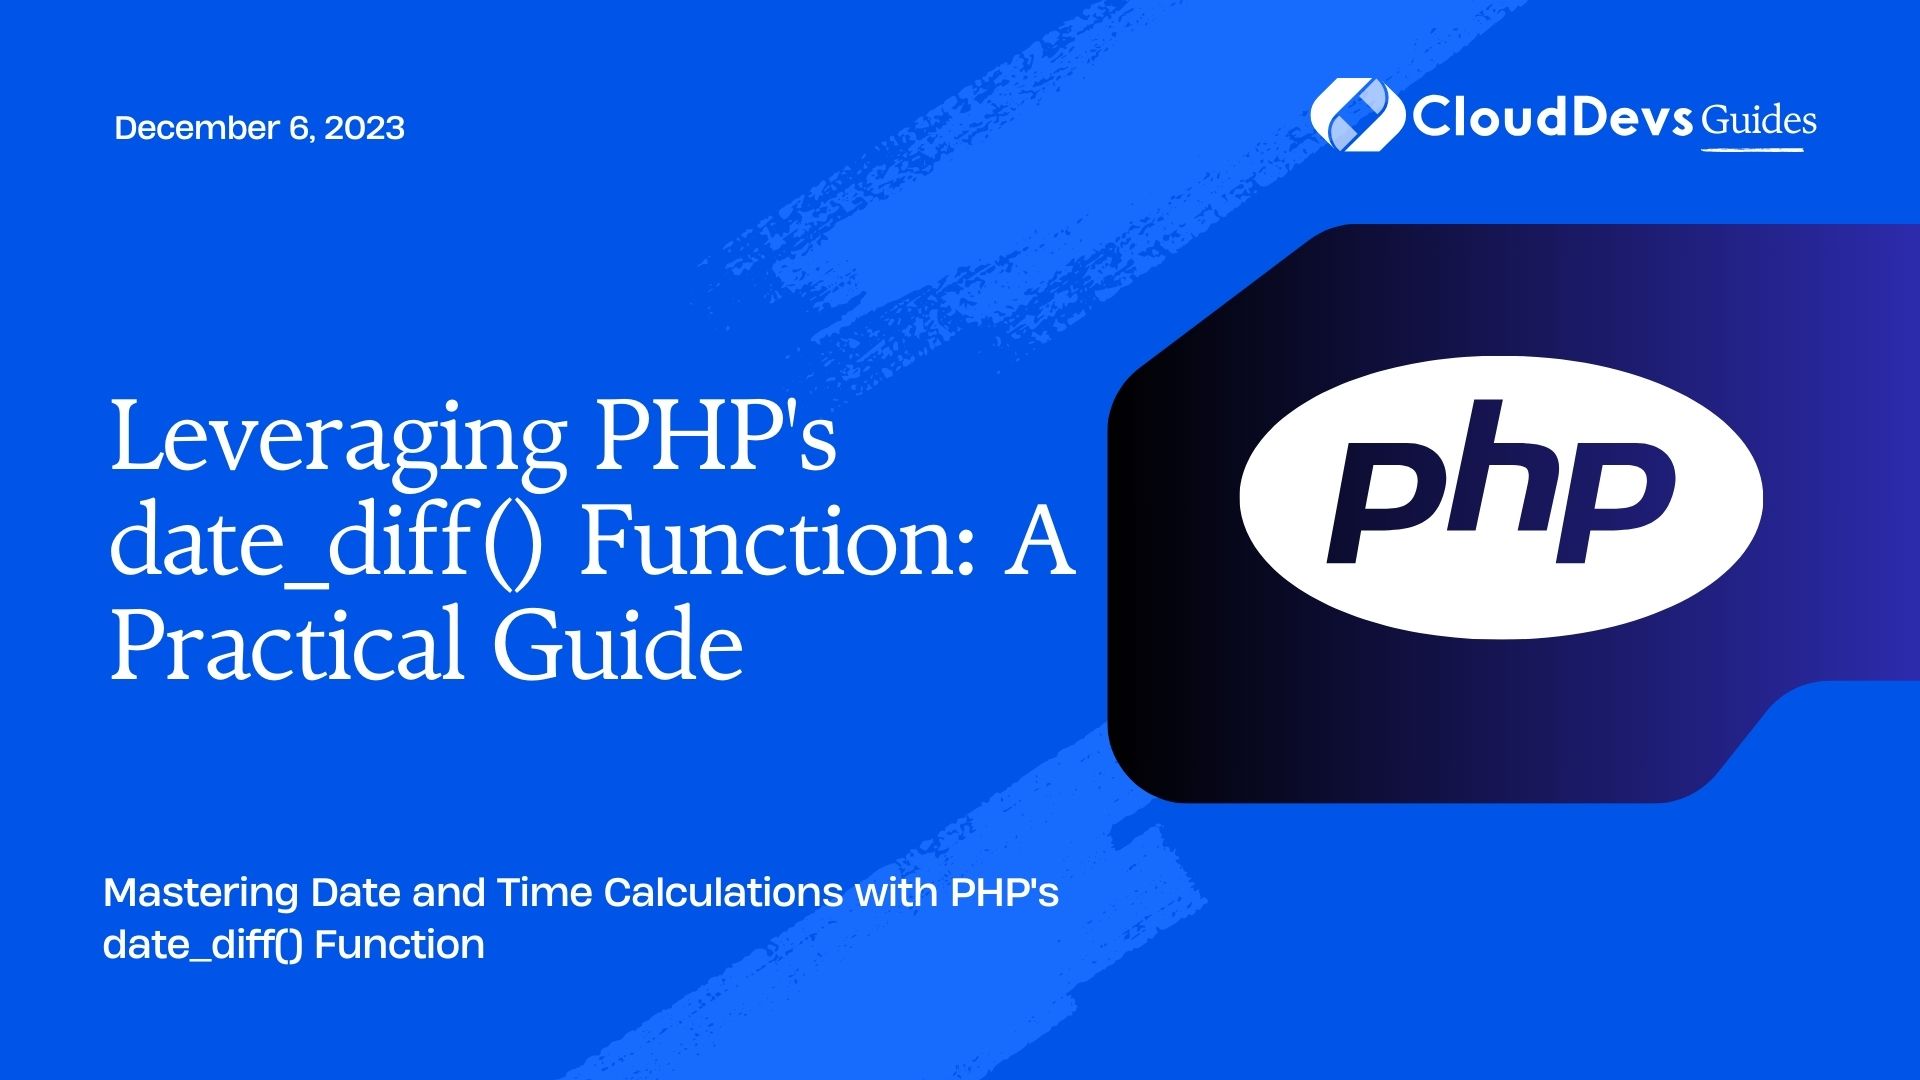 Leveraging PHP's date_diff() Function: A Practical Guide